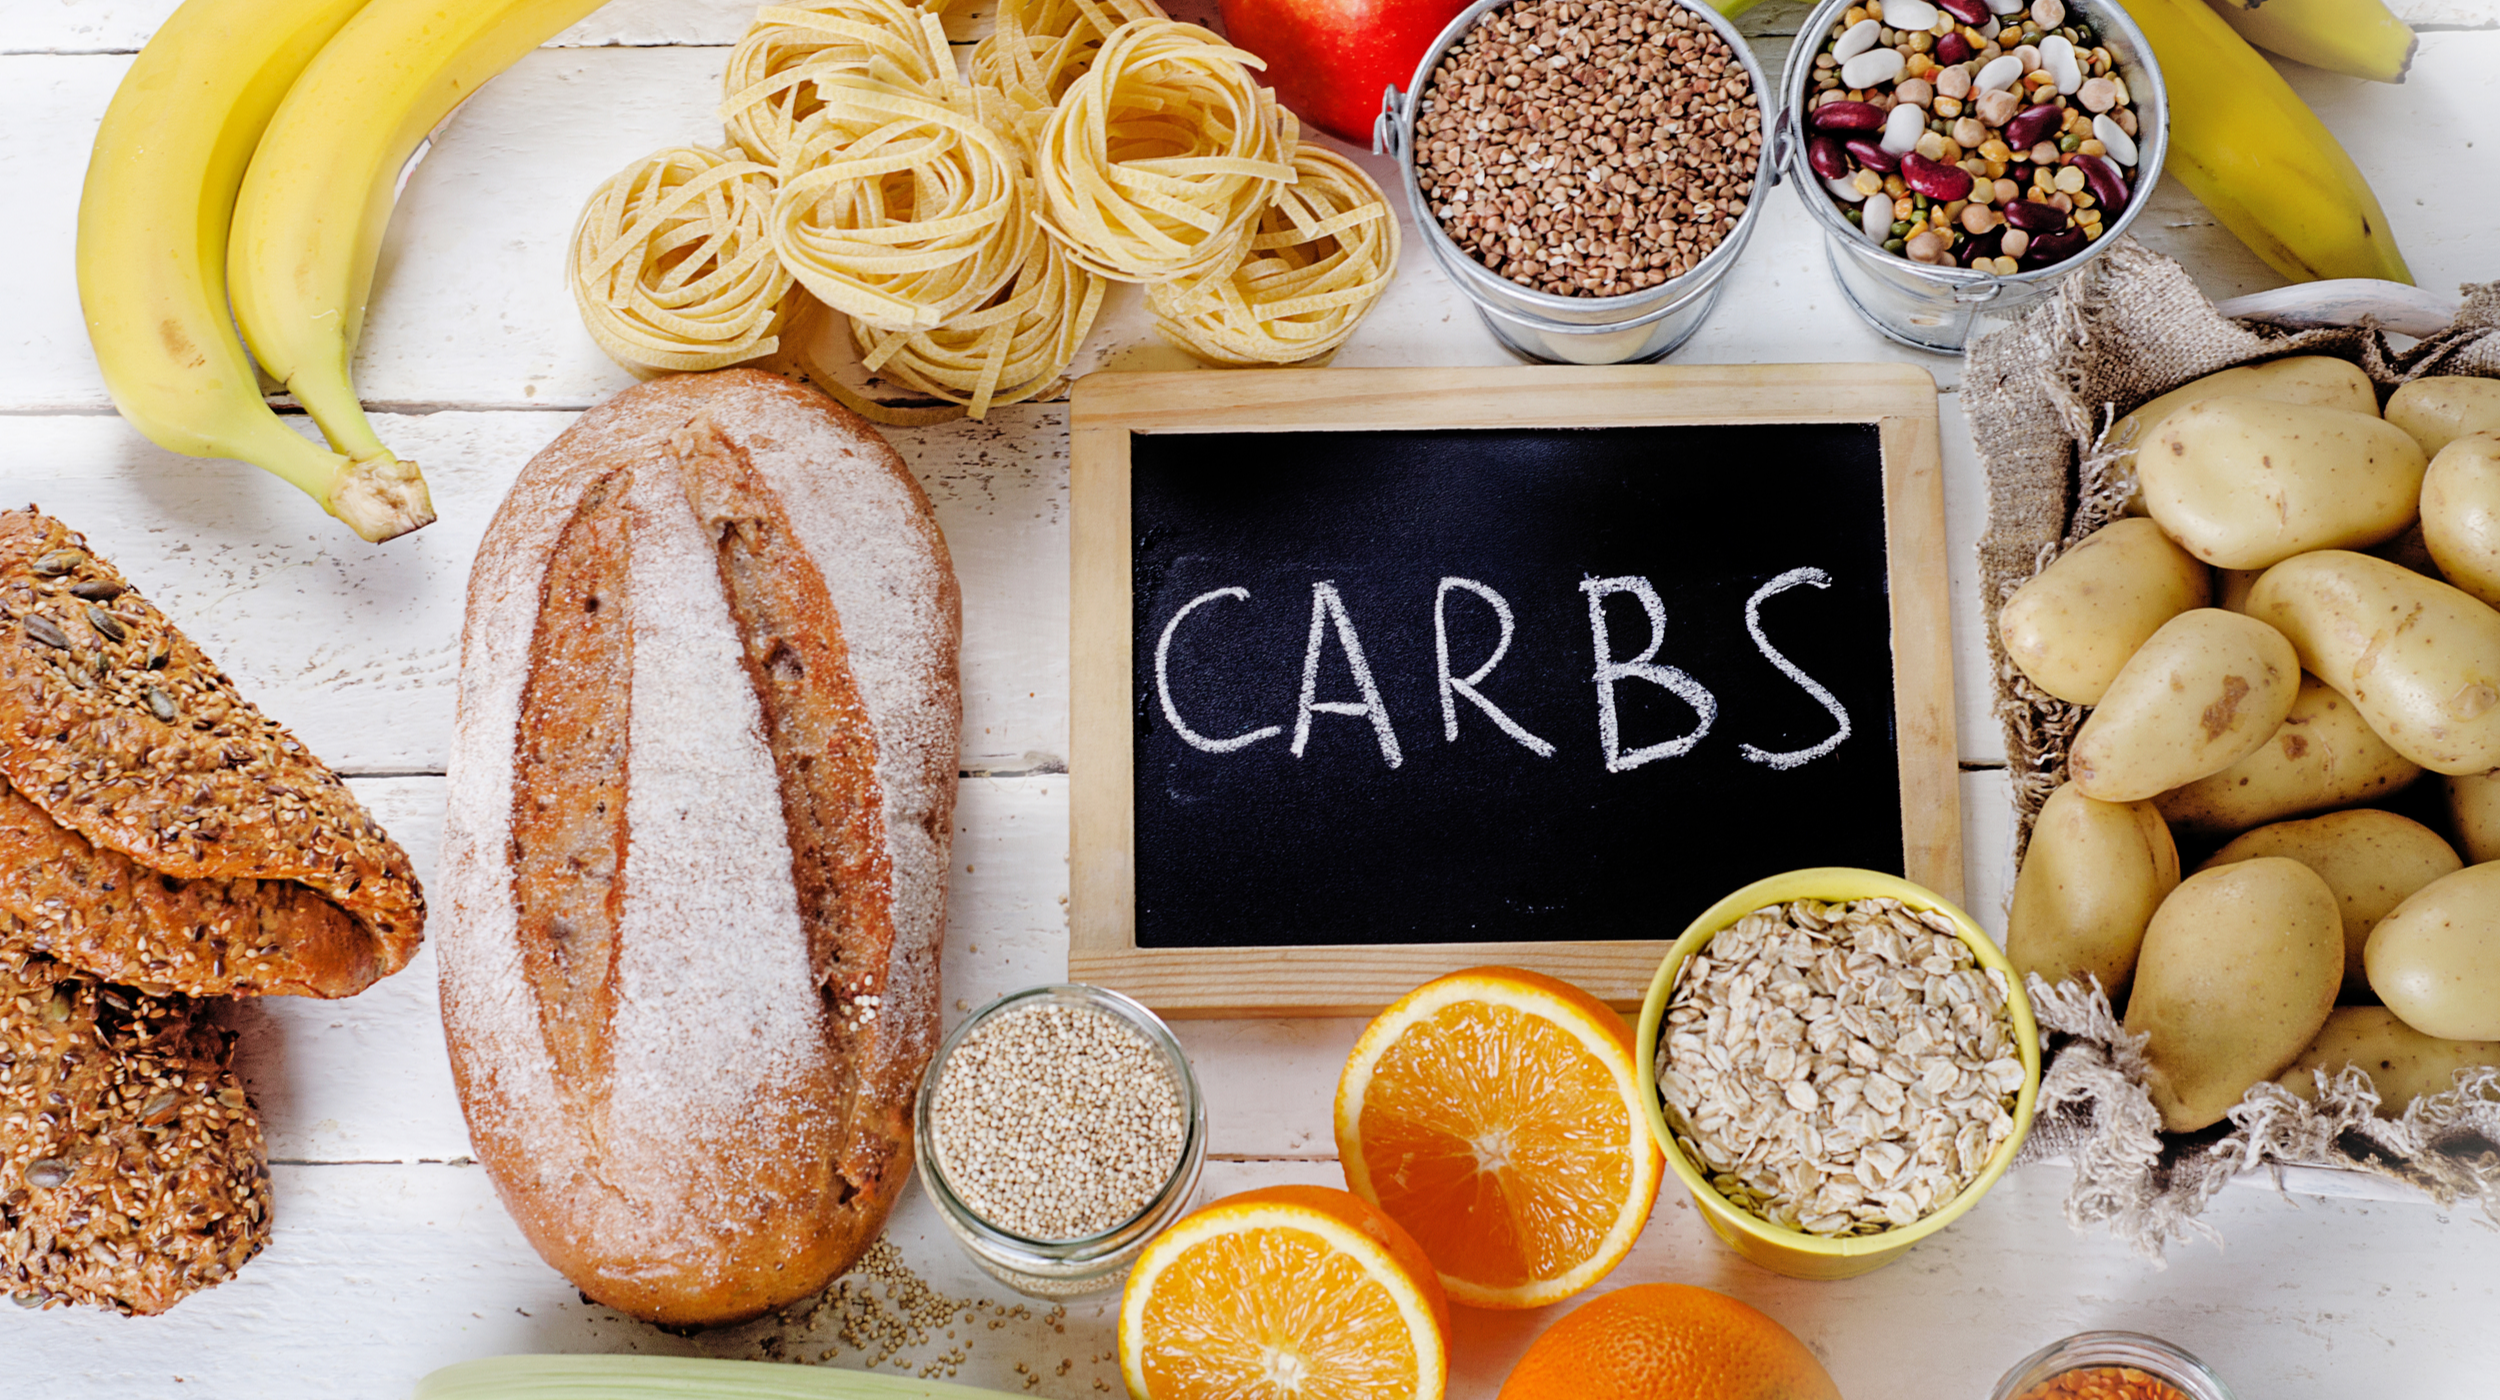 What are Carbohydrates?